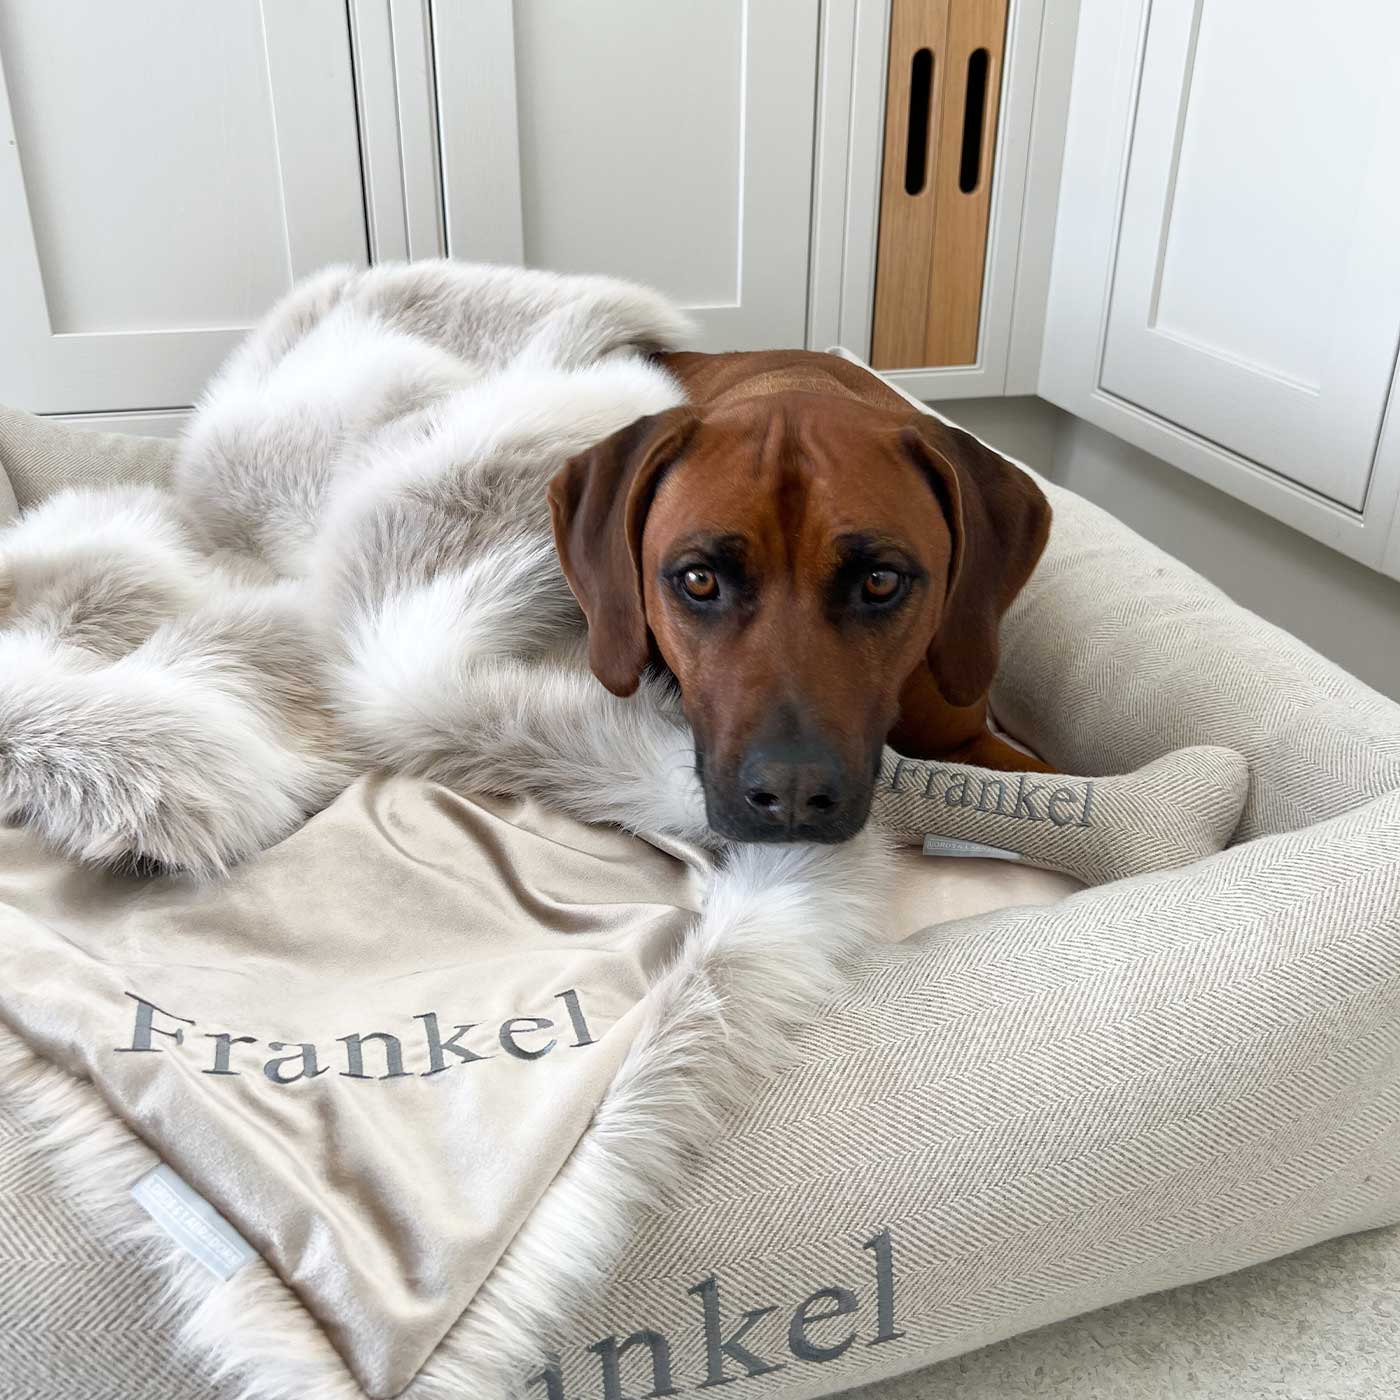 Discover Our Luxurious Mushroom Velvet & Reindeer Faux Fur Dog Blanket With Plush faux Fur Reverse, The Perfect Blanket For Dogs and Puppies, Available To Personalise And In 2 Sizes Here at Lords & Labradors